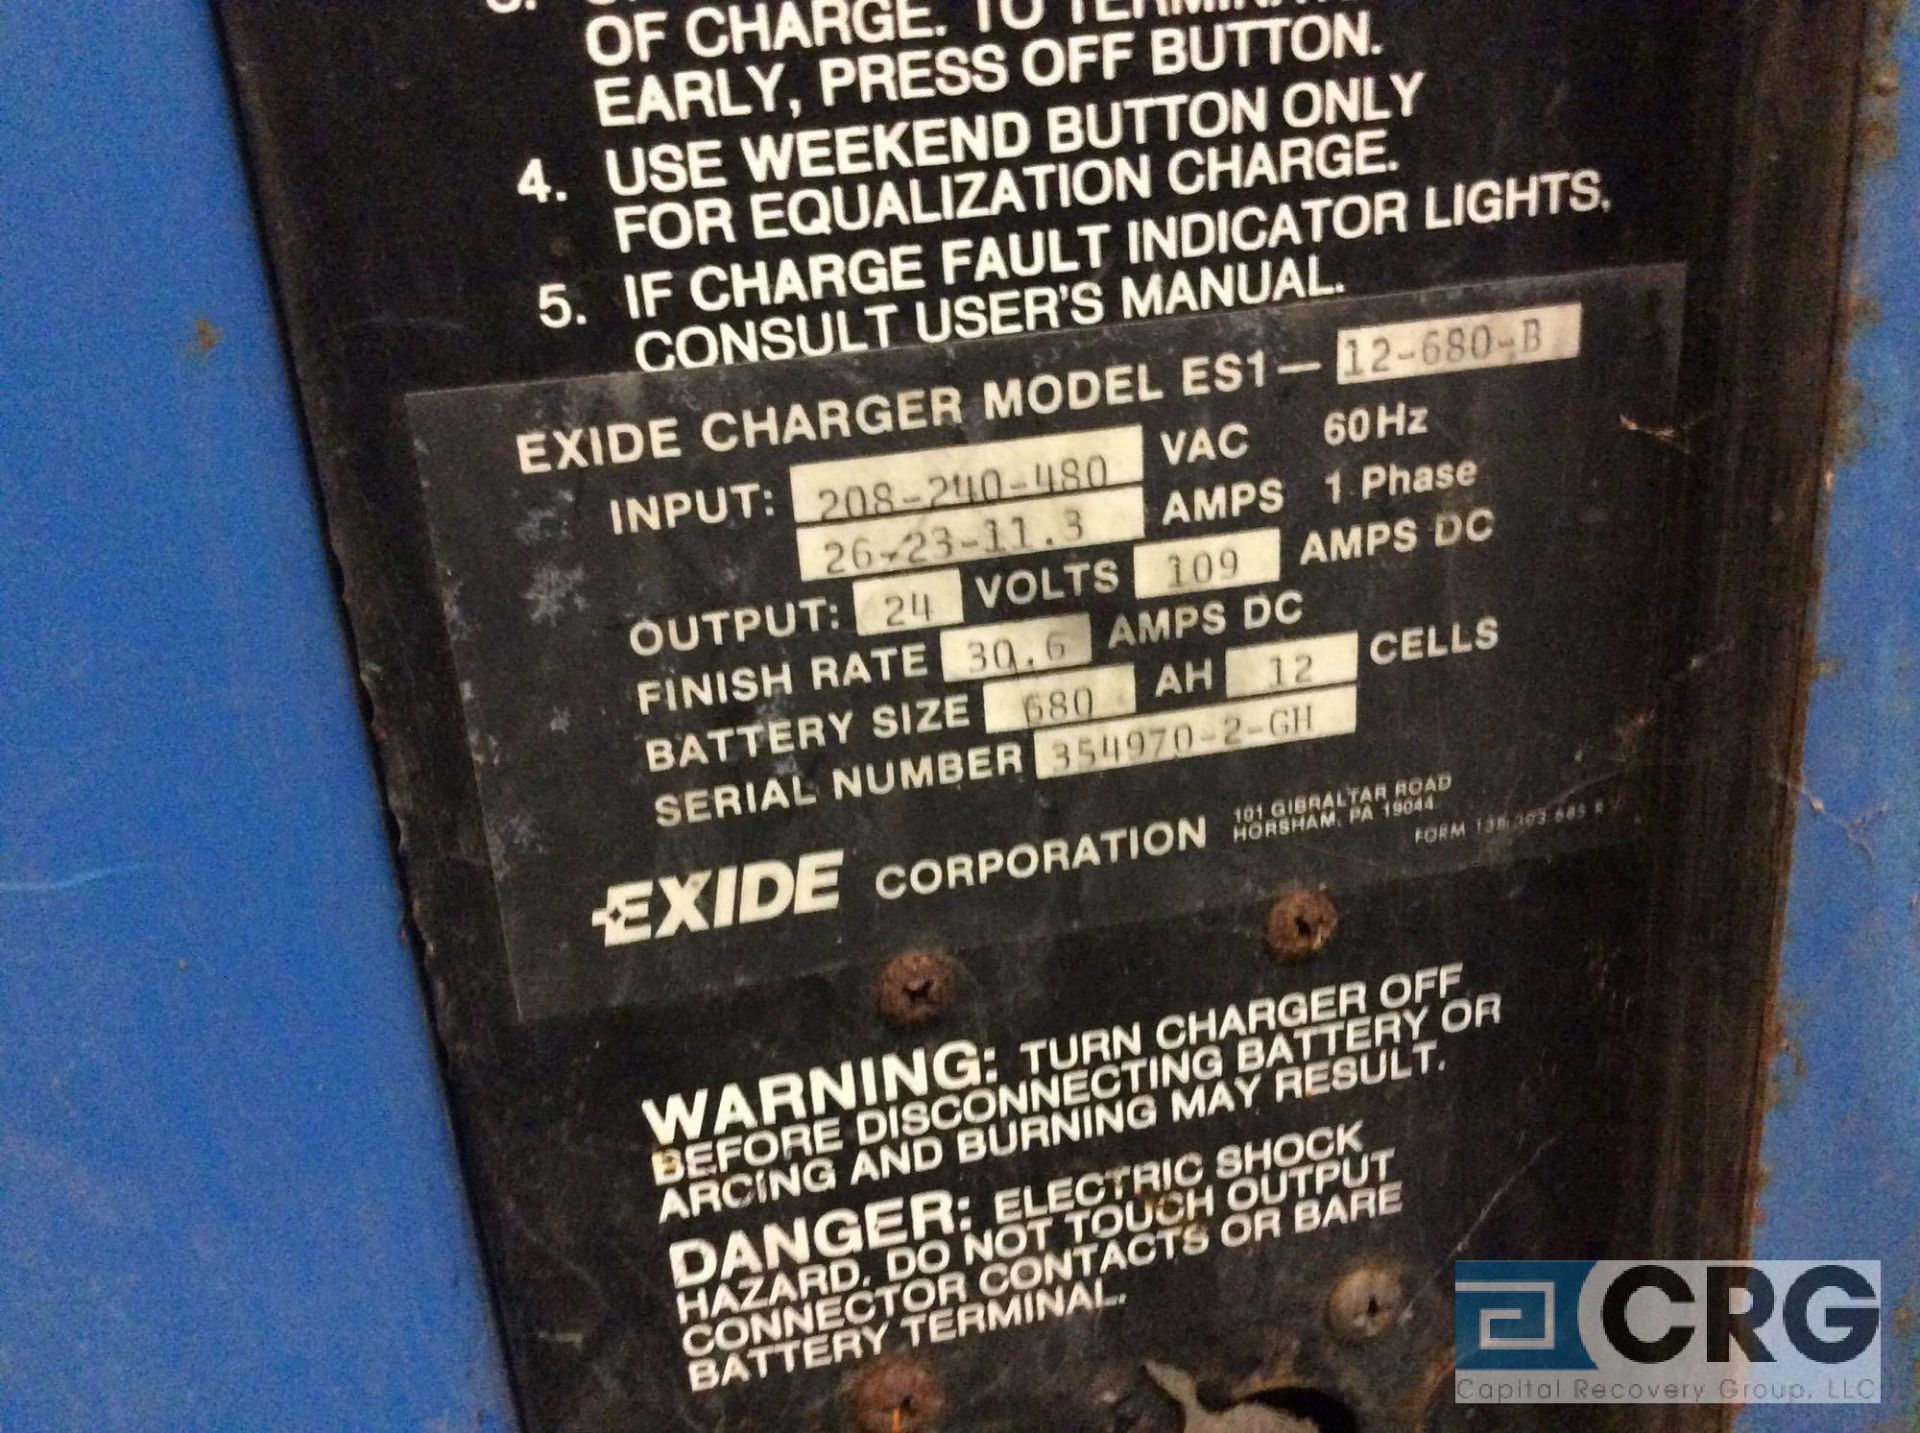 Exile System 1000 battery charger, model ES1-12-680-B, serial 354970-2-GH, - Image 3 of 3